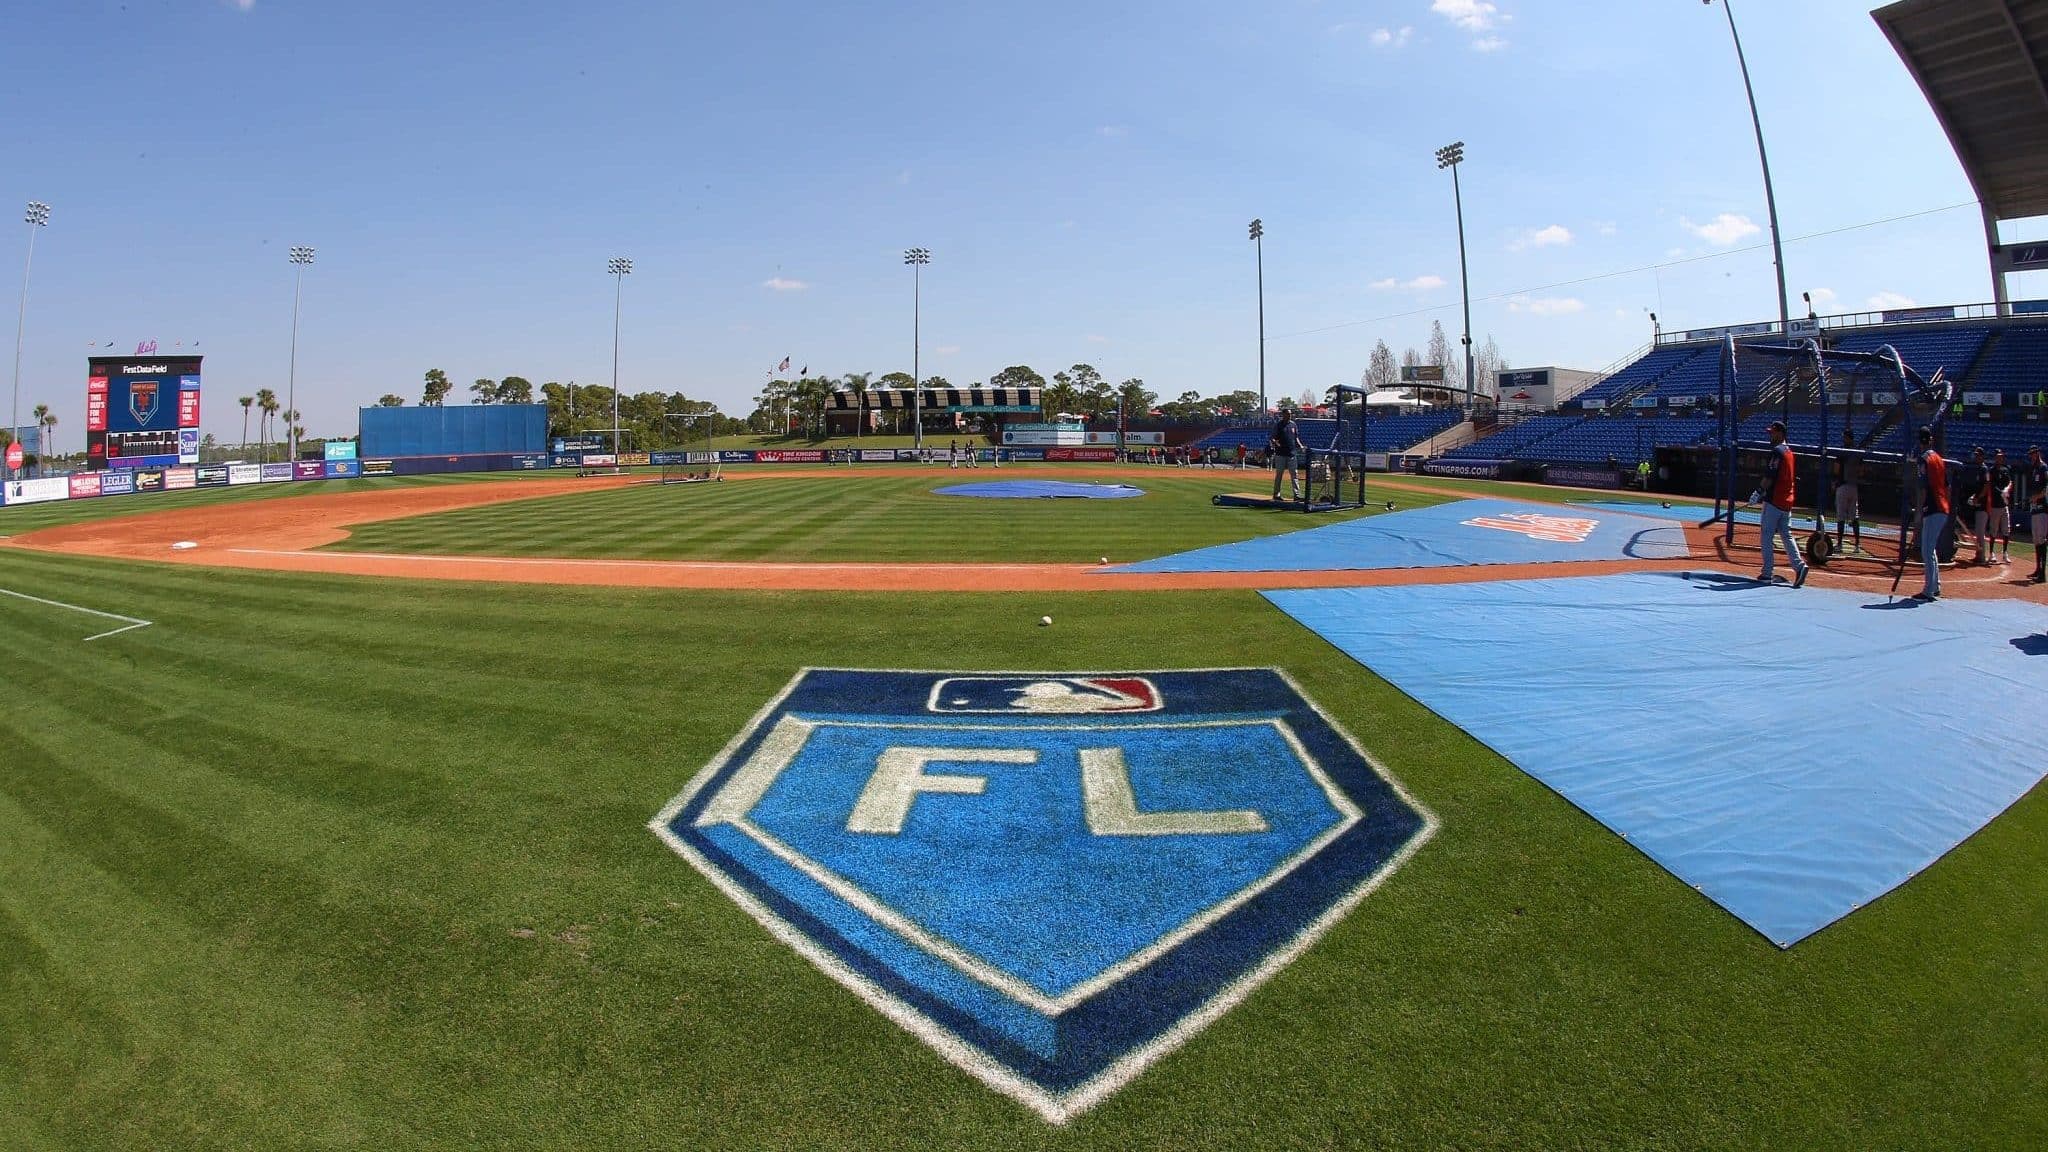 PORT ST. LUCIE, FL - MARCH 06: The Grapefruit League logo on the third base line before a spring training game between the Houston Astros and New York Mets at First Data Field on March 6, 2018 in Port St. Lucie, Florida.